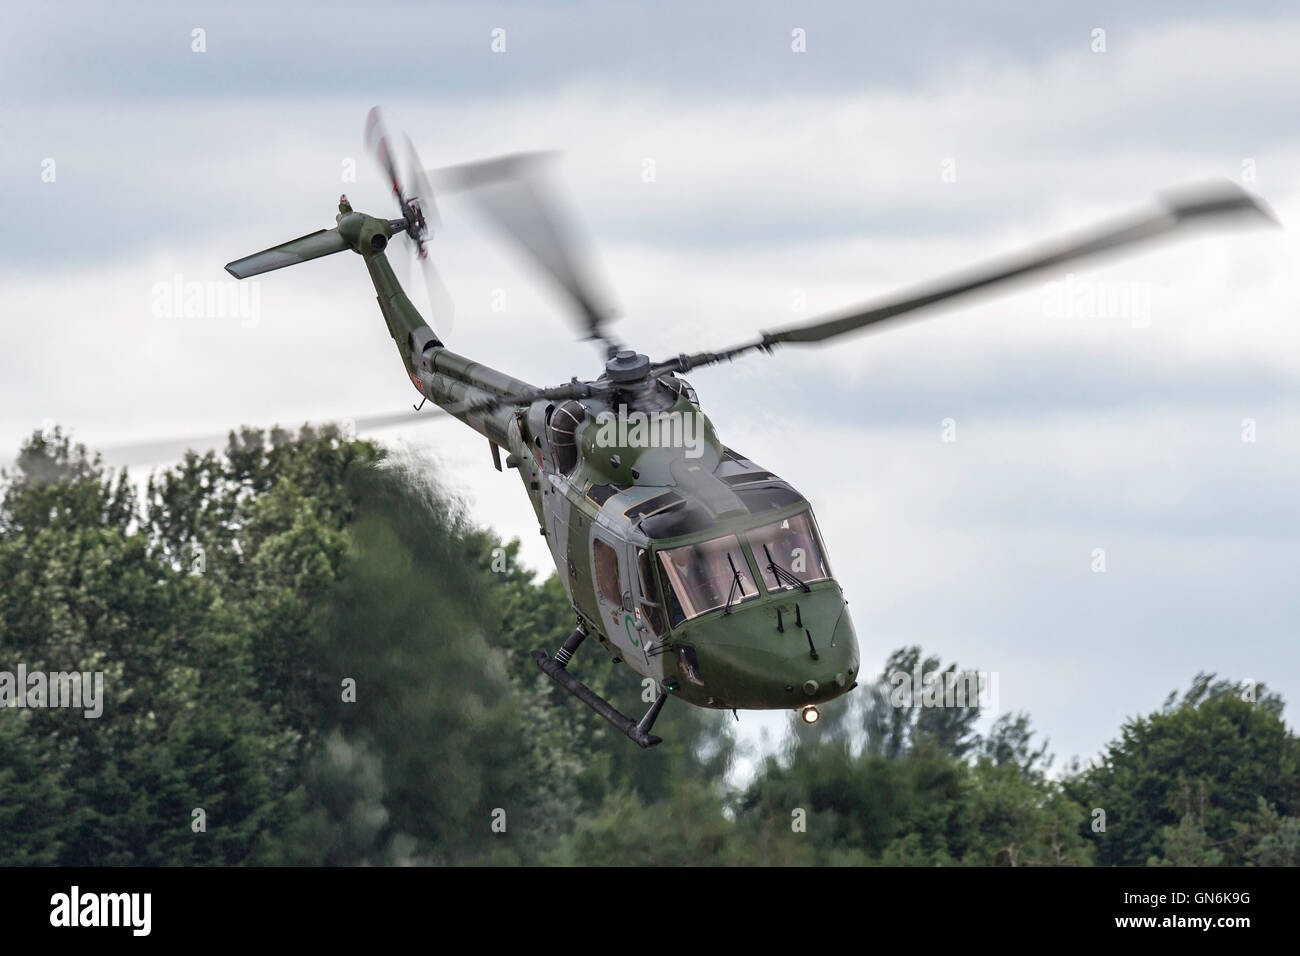 British Army (Royal Army) Air Corps (AAC) Westland Lynx AH7 battlefield reconnaissance helicopter. Stock Photo